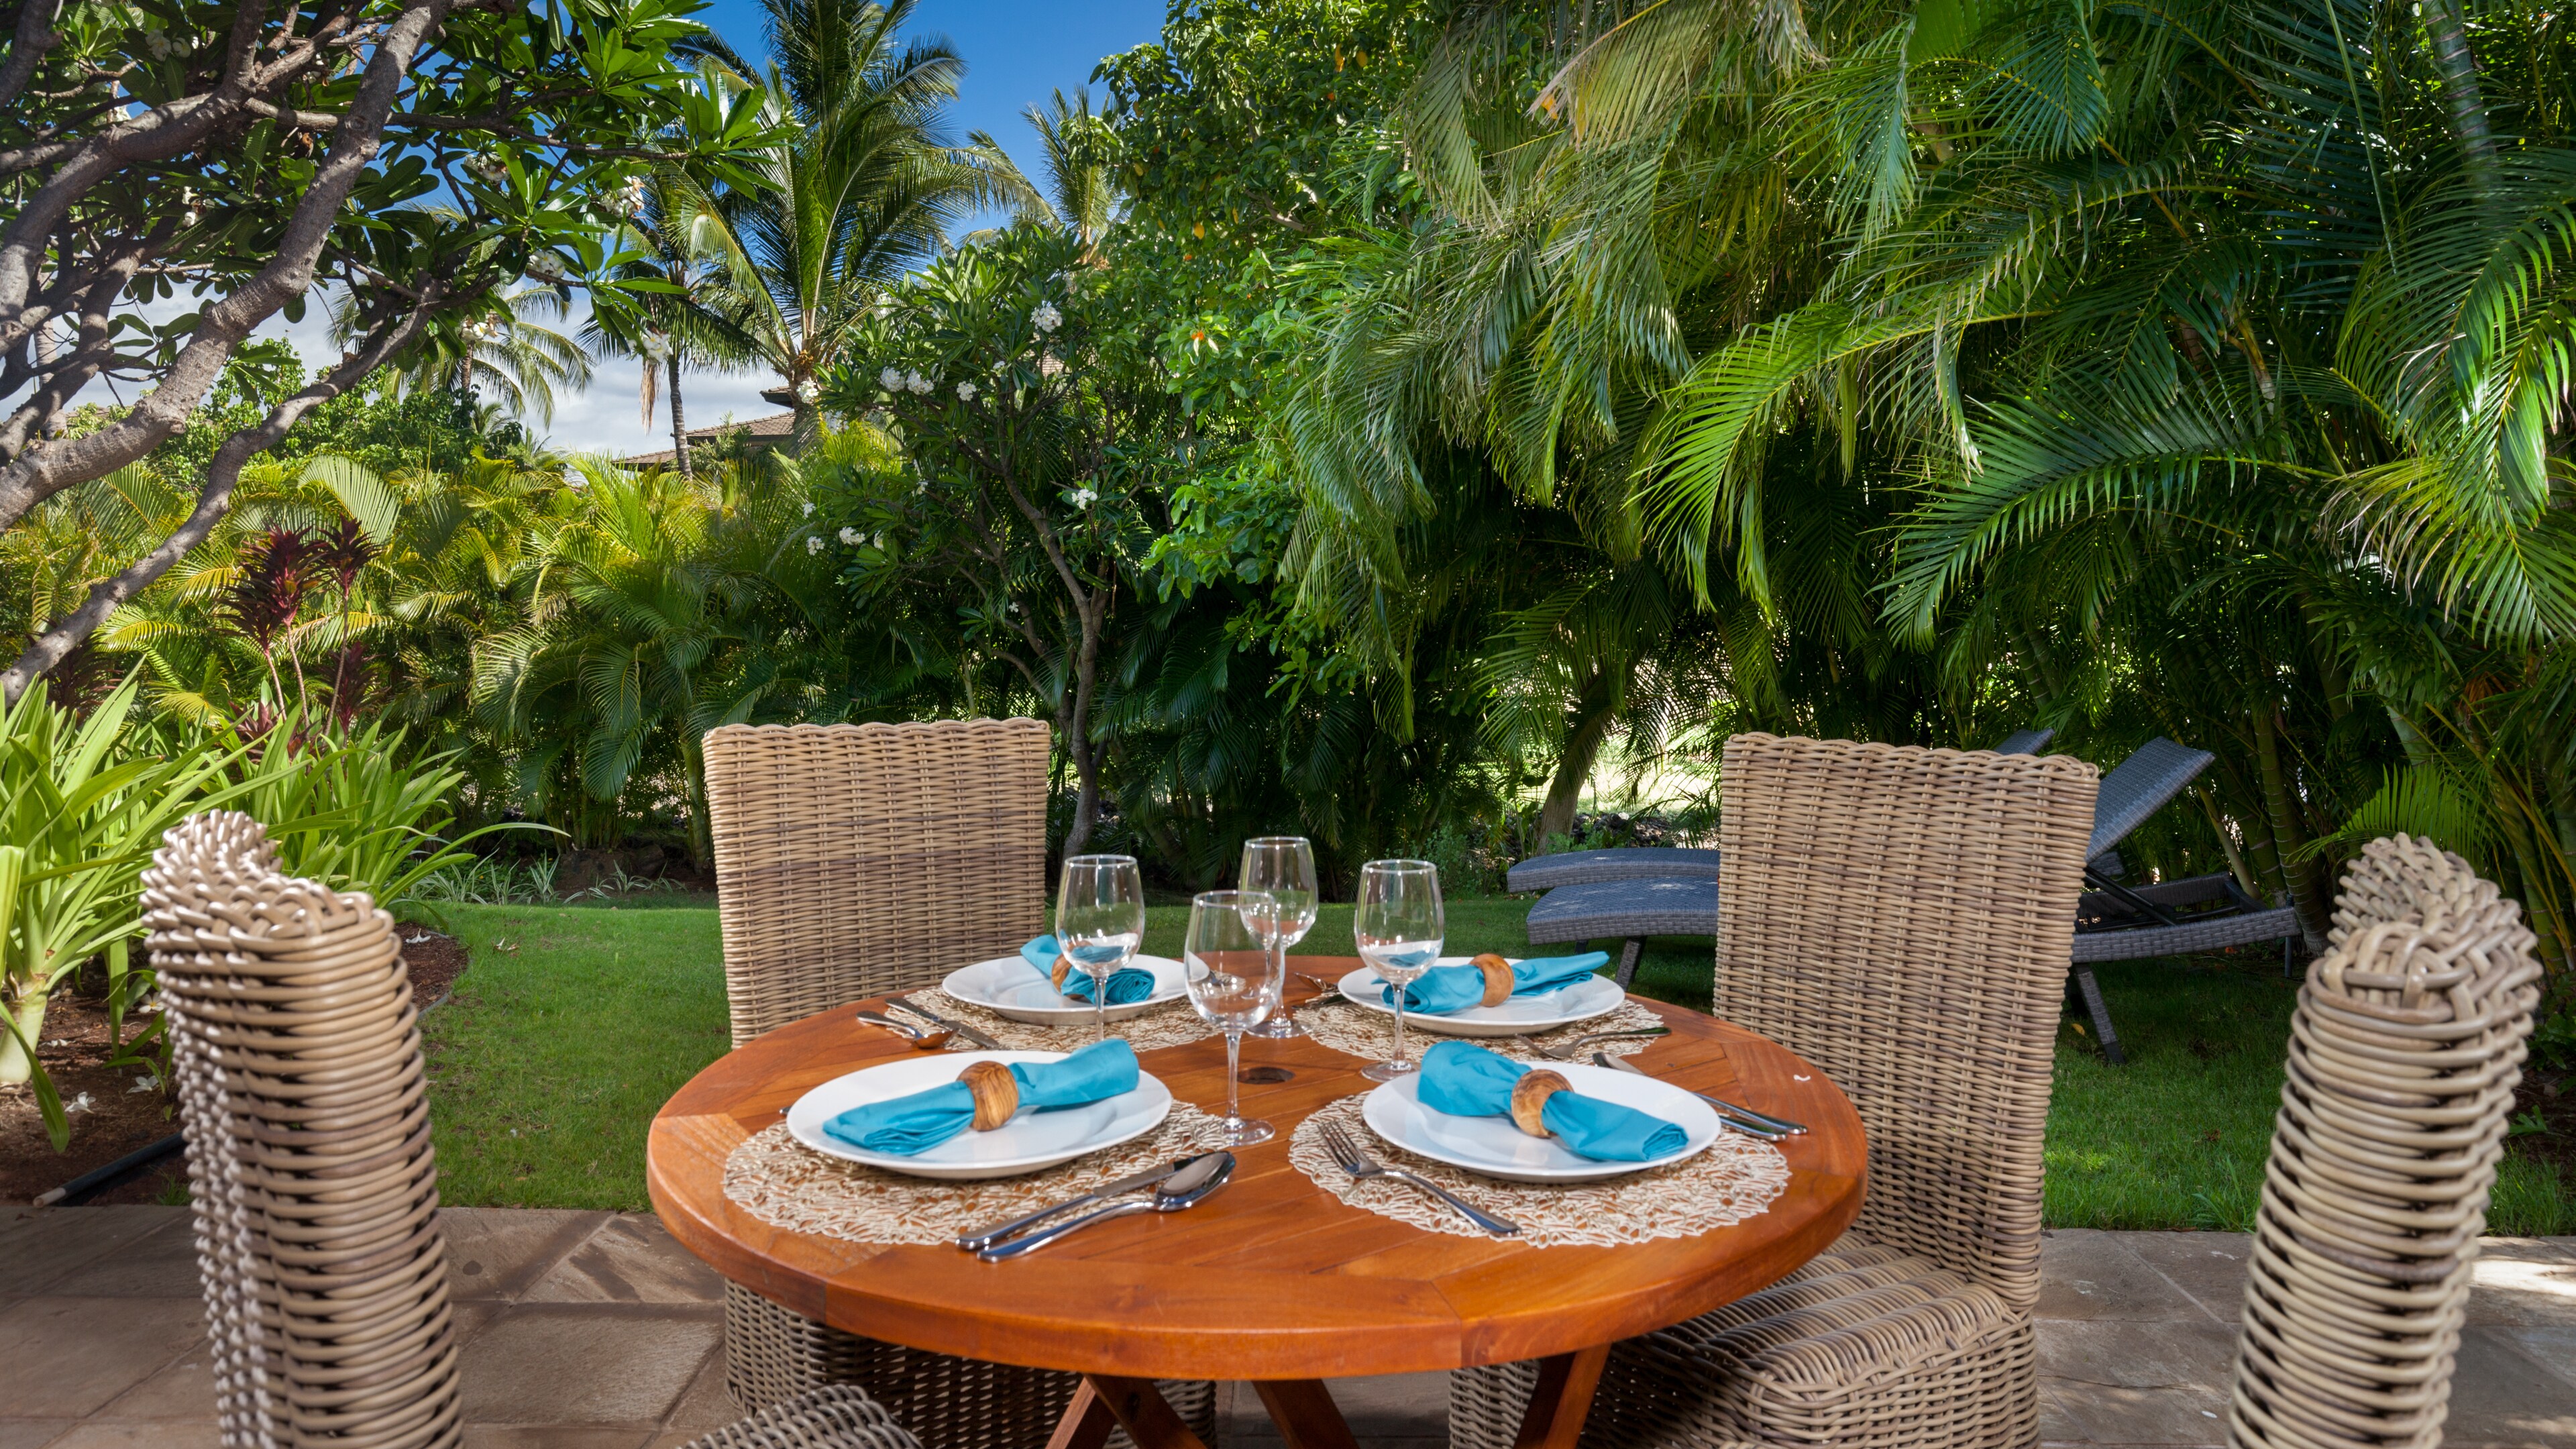 Outdoor dining in tropical paradise